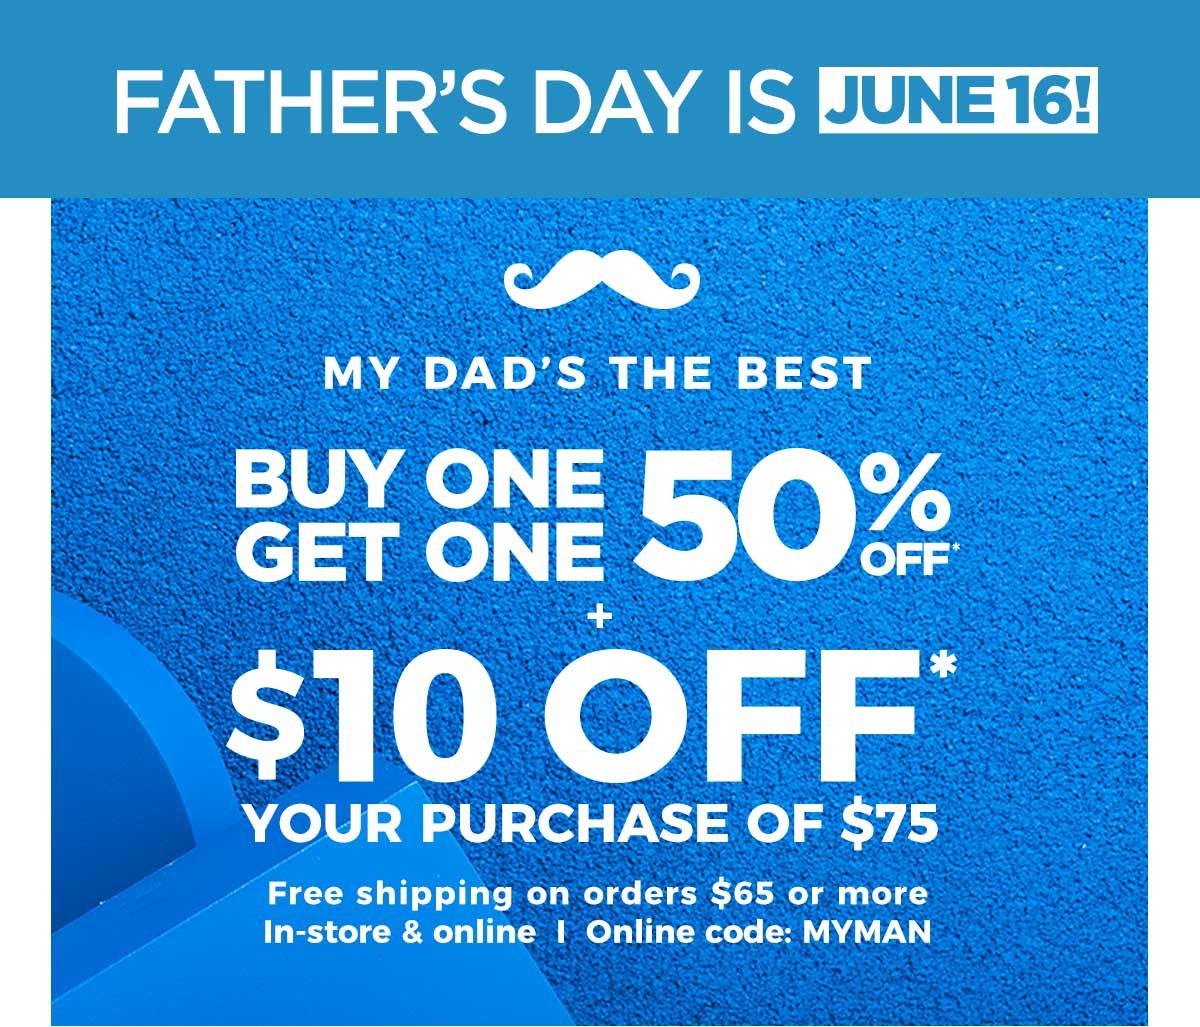 Rack Room Shoes Use This 10 Coupon For Dad S Day Shopping